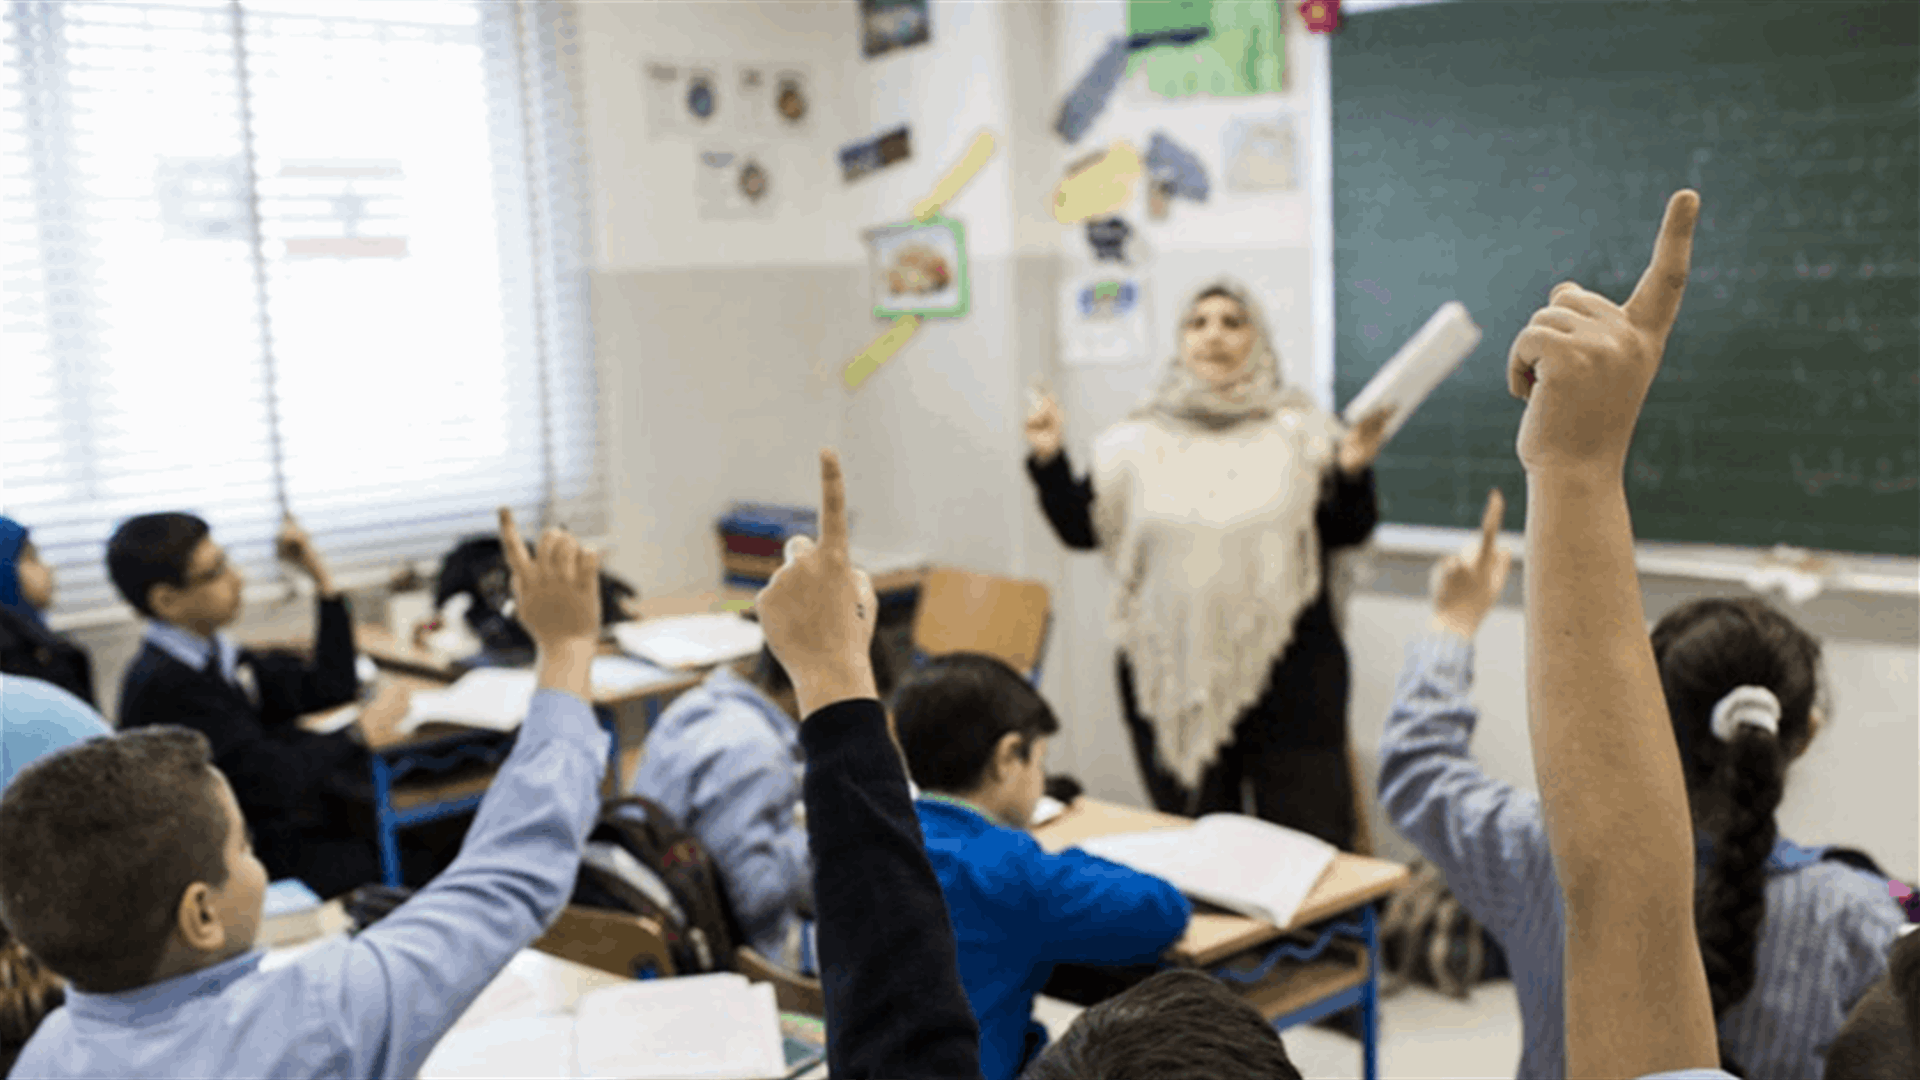 Lebanon suspends afternoon classes for Syrian refugees in public schools